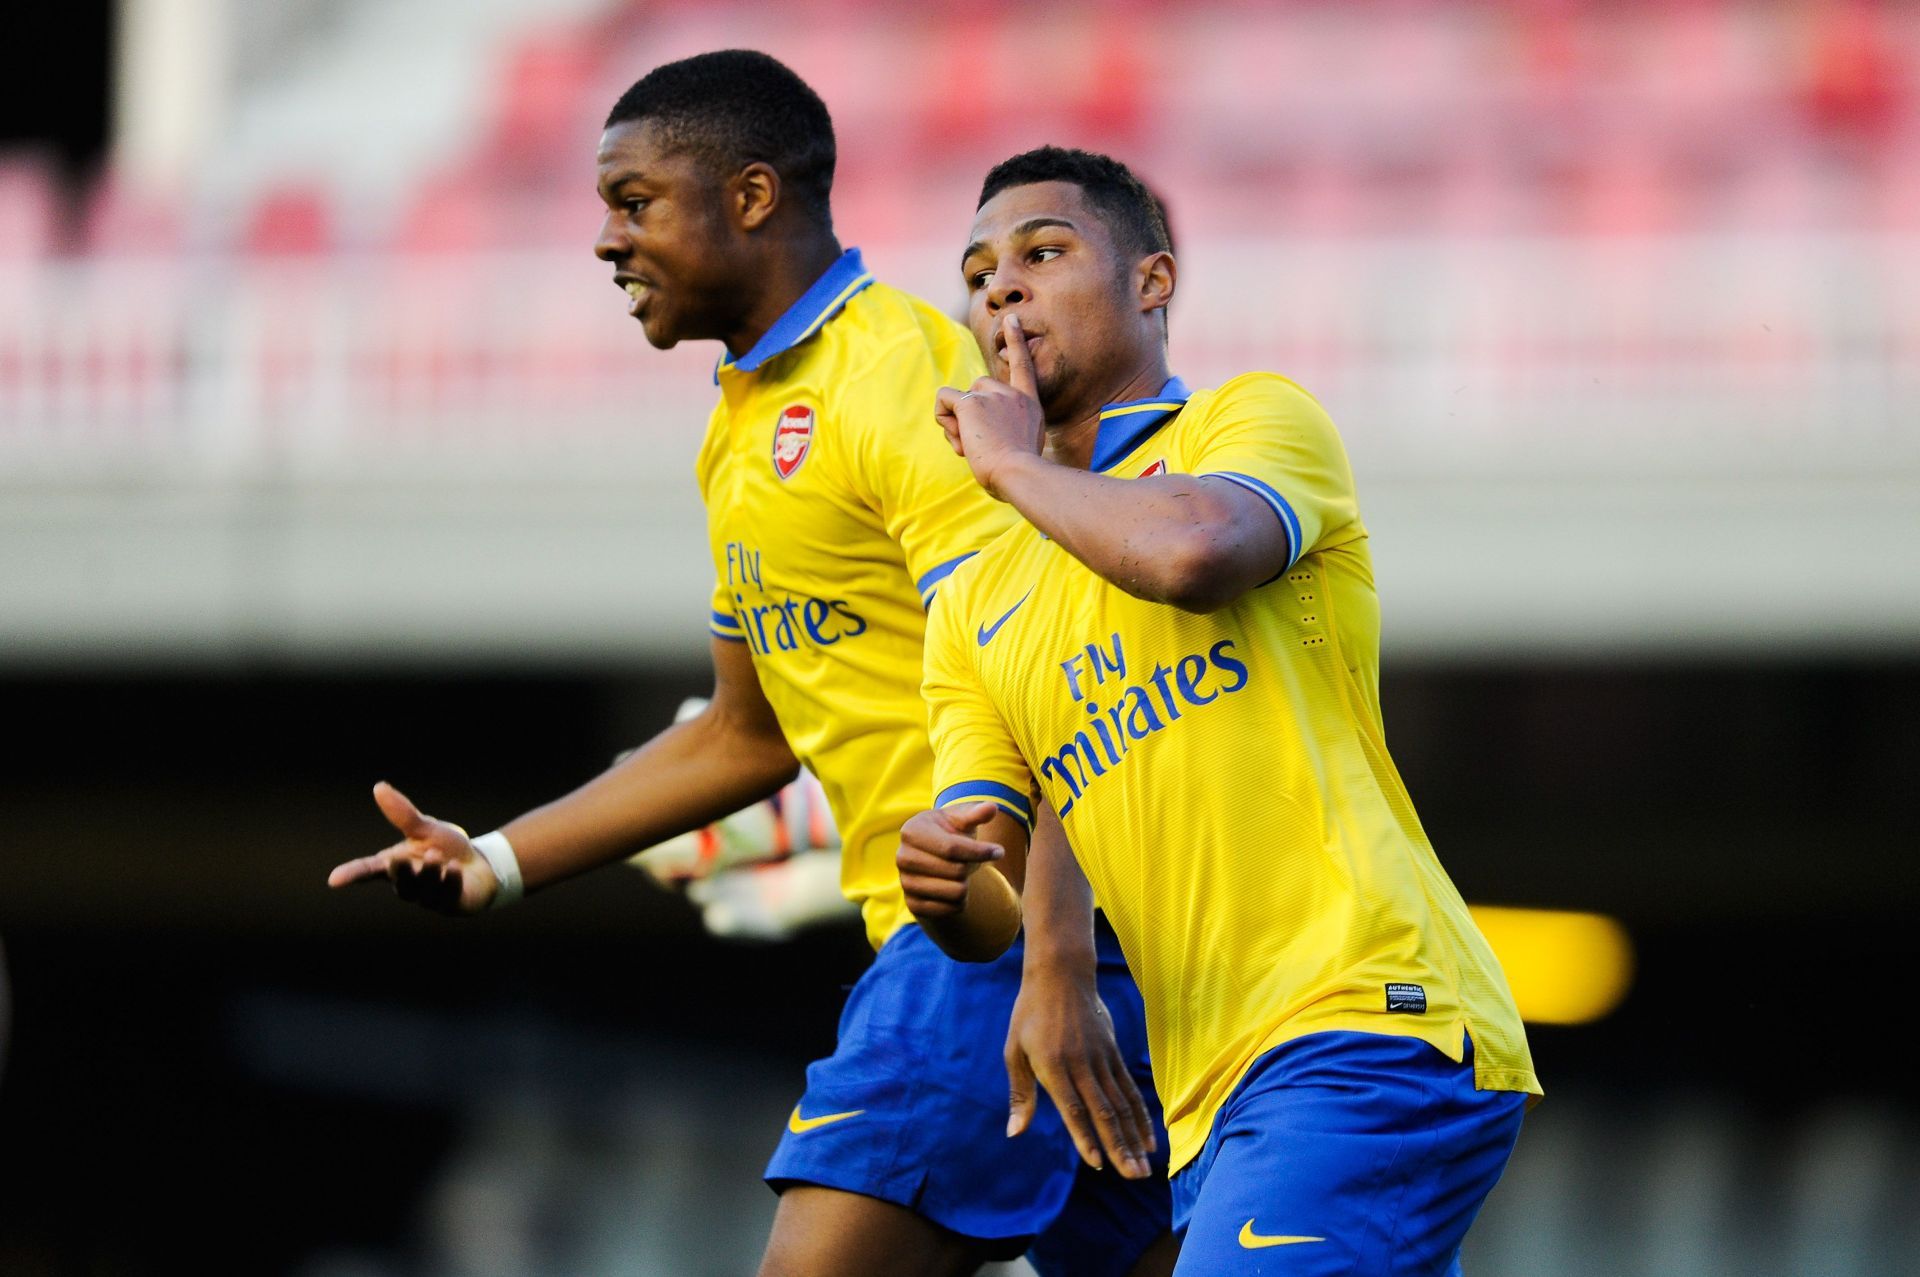 Former Arsenal youngster Serge Gnabry